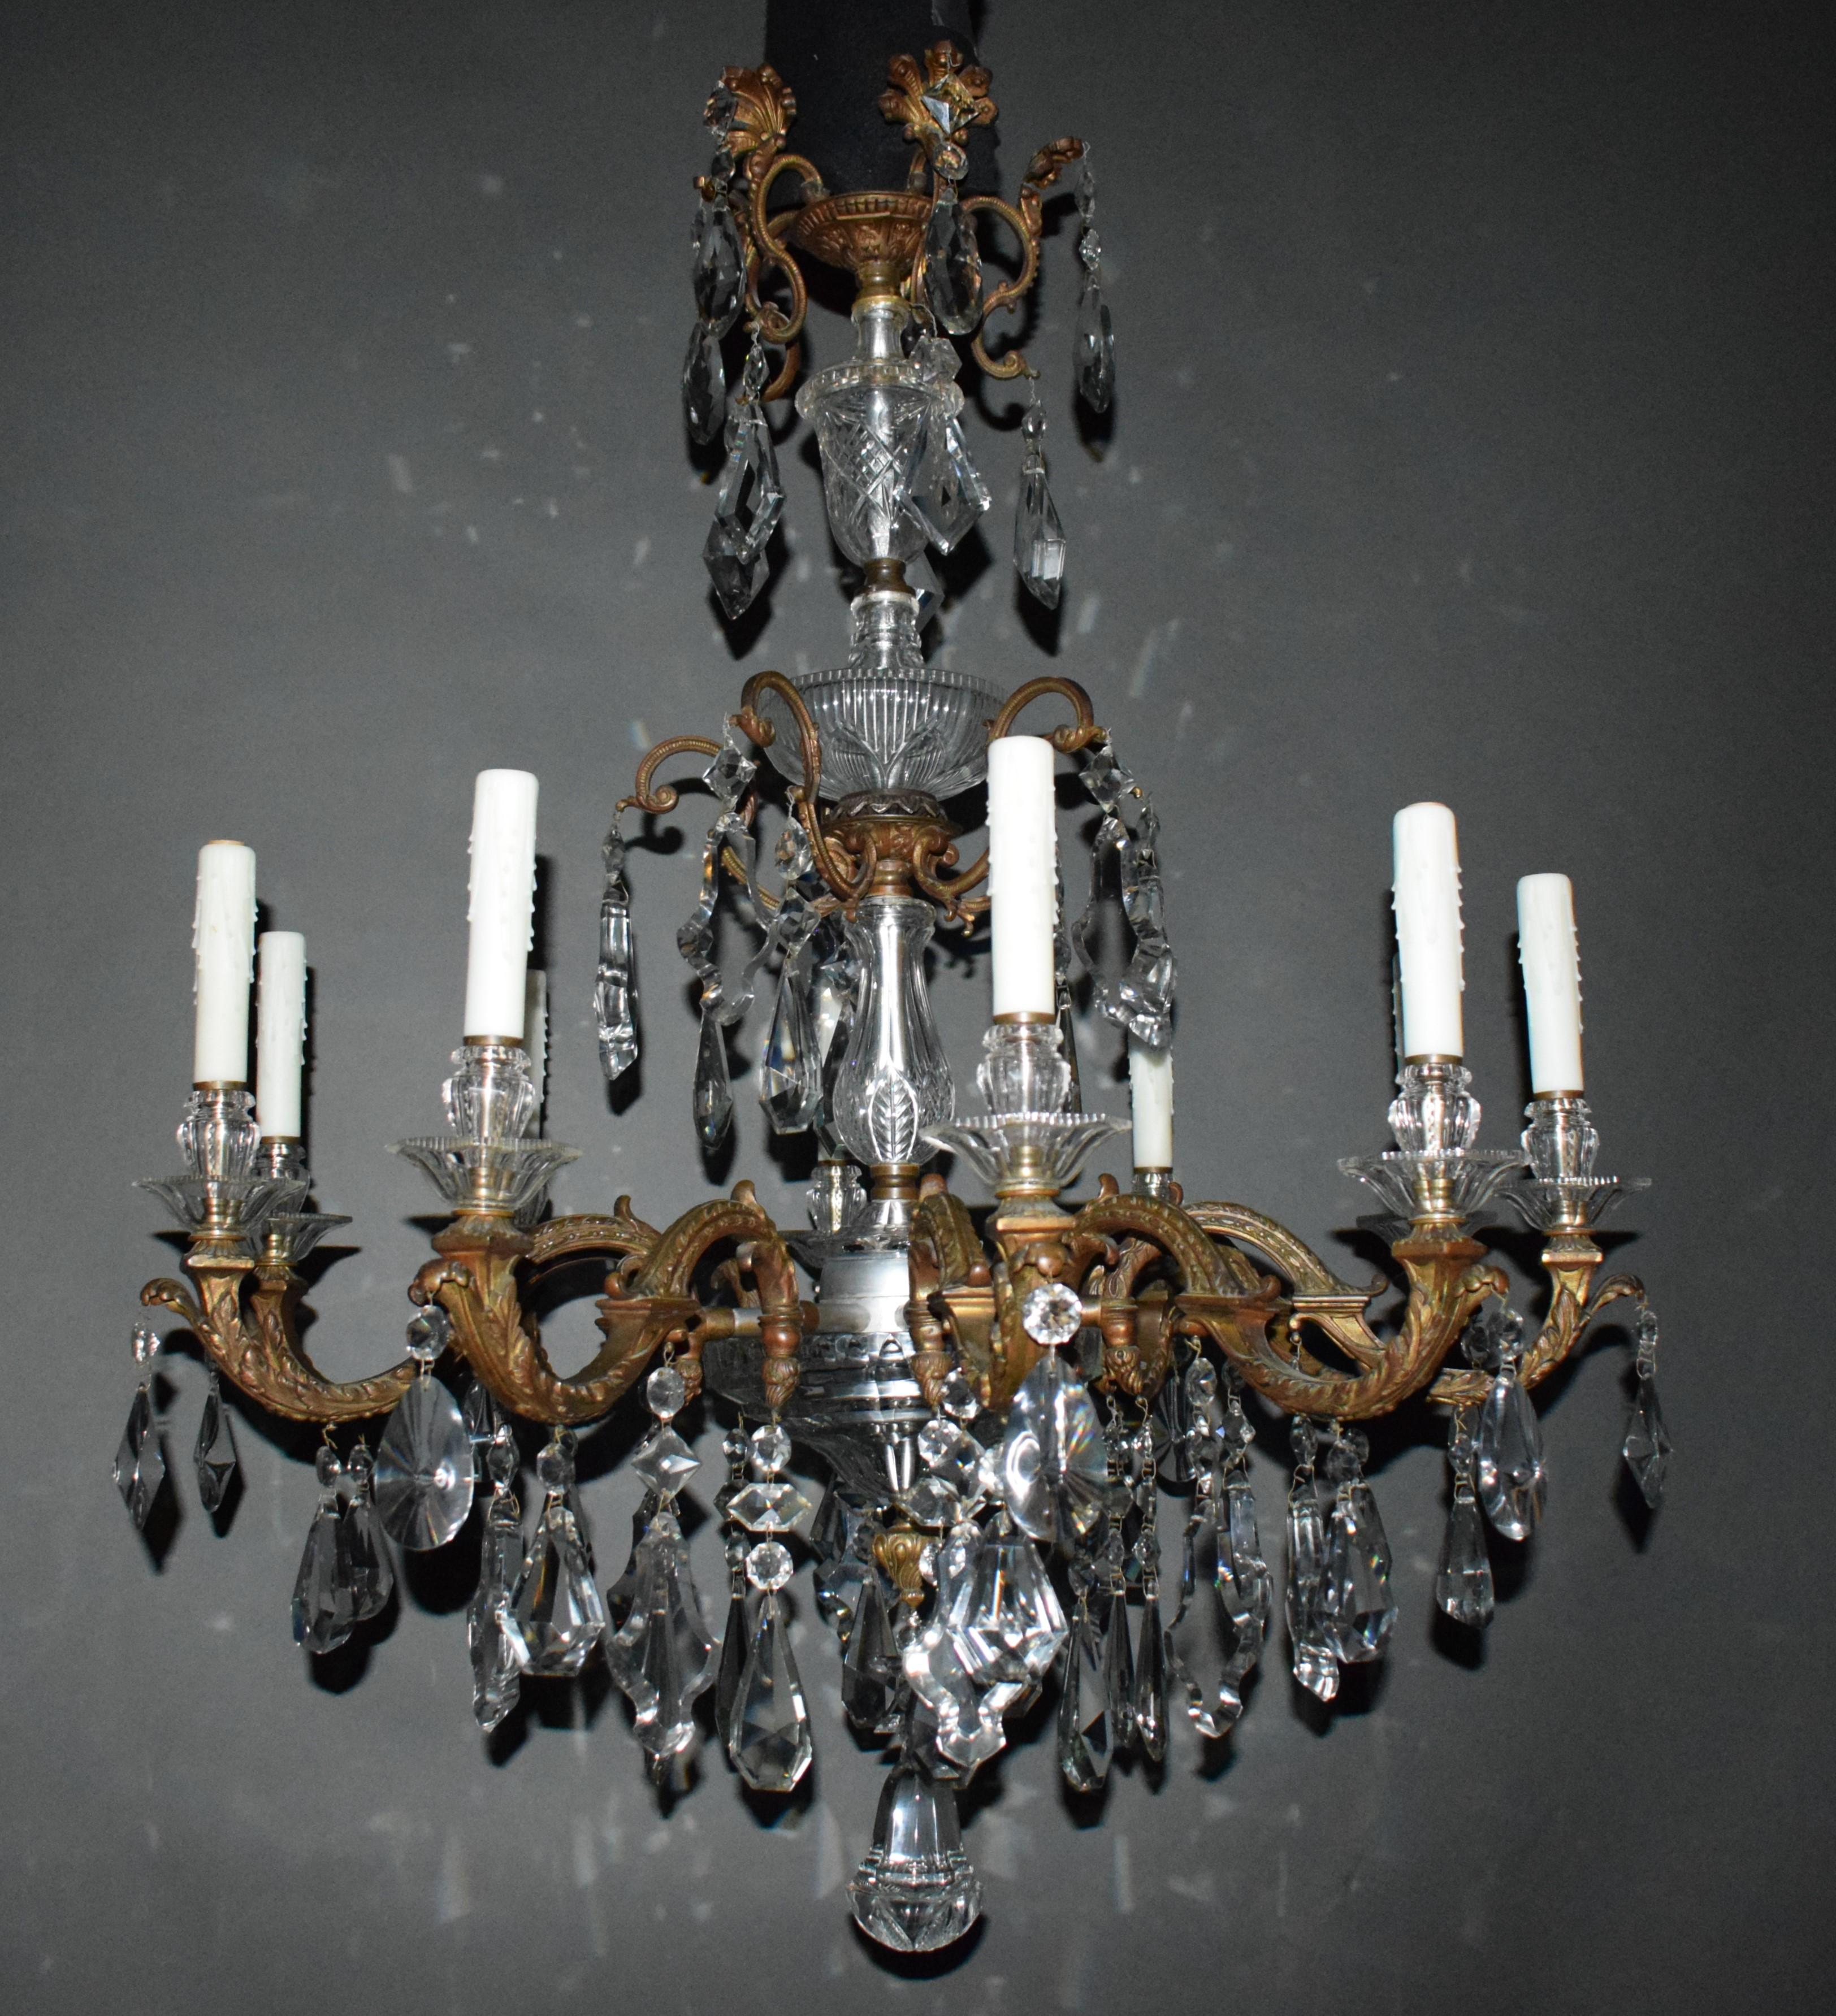 A very fine bronze & crystal chandelier featuring hand cut crystal pendalogues. 10 Lights.
England, circa 1910
NI1206.